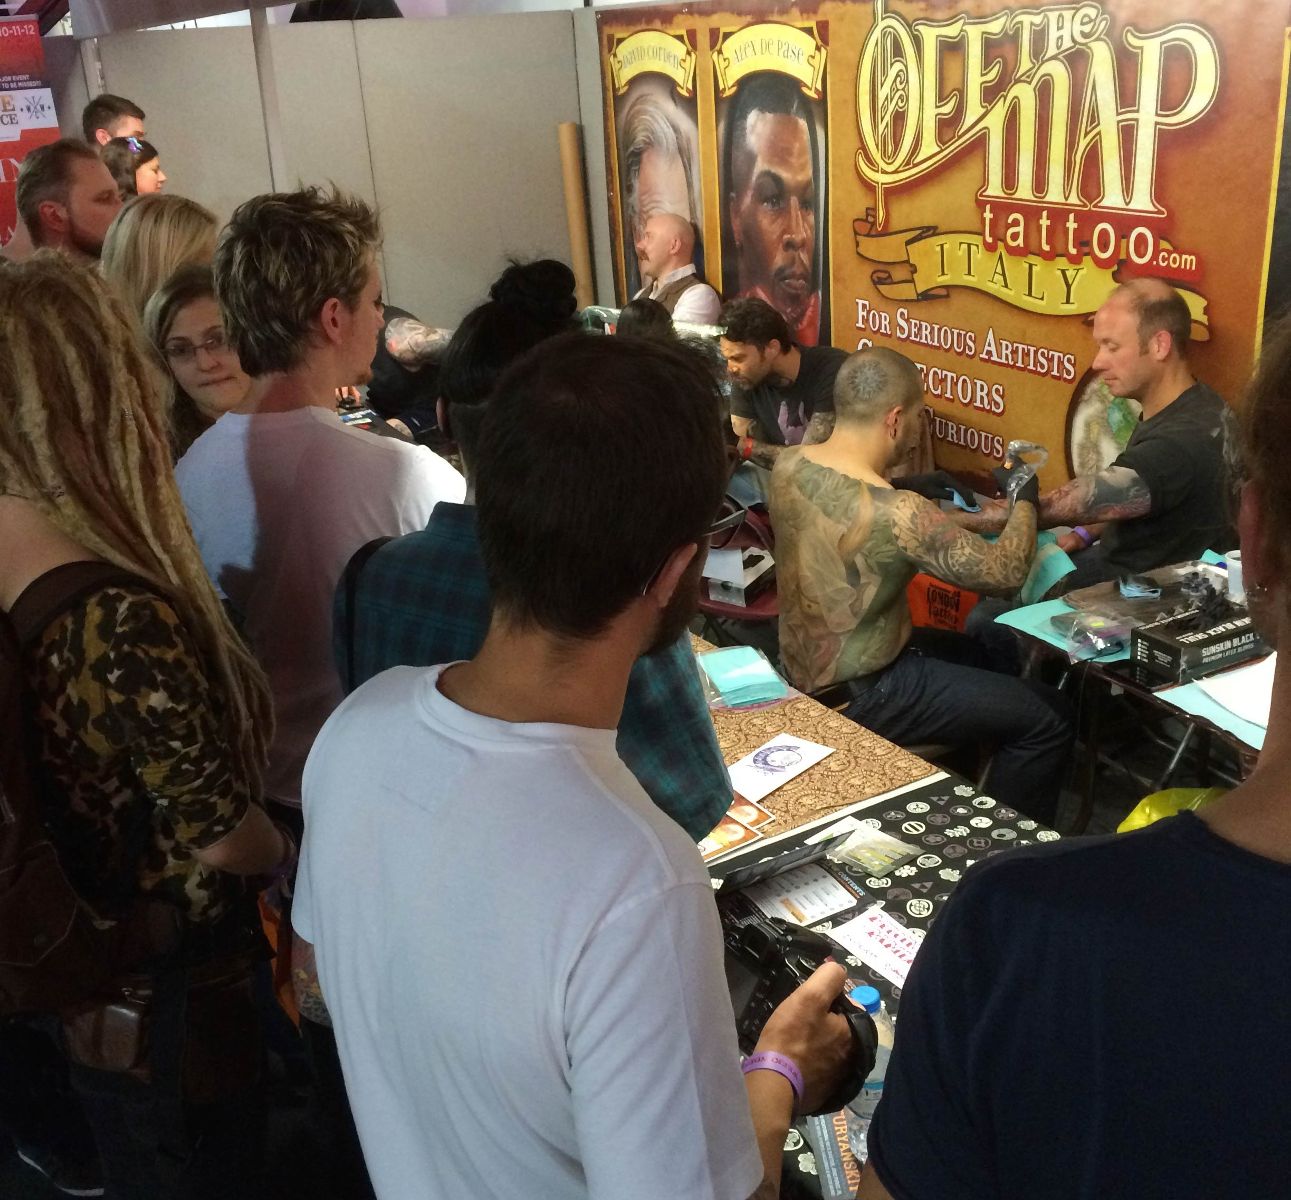 Off the Map Tattoo Booth at the 2014 London Tattoo Convention